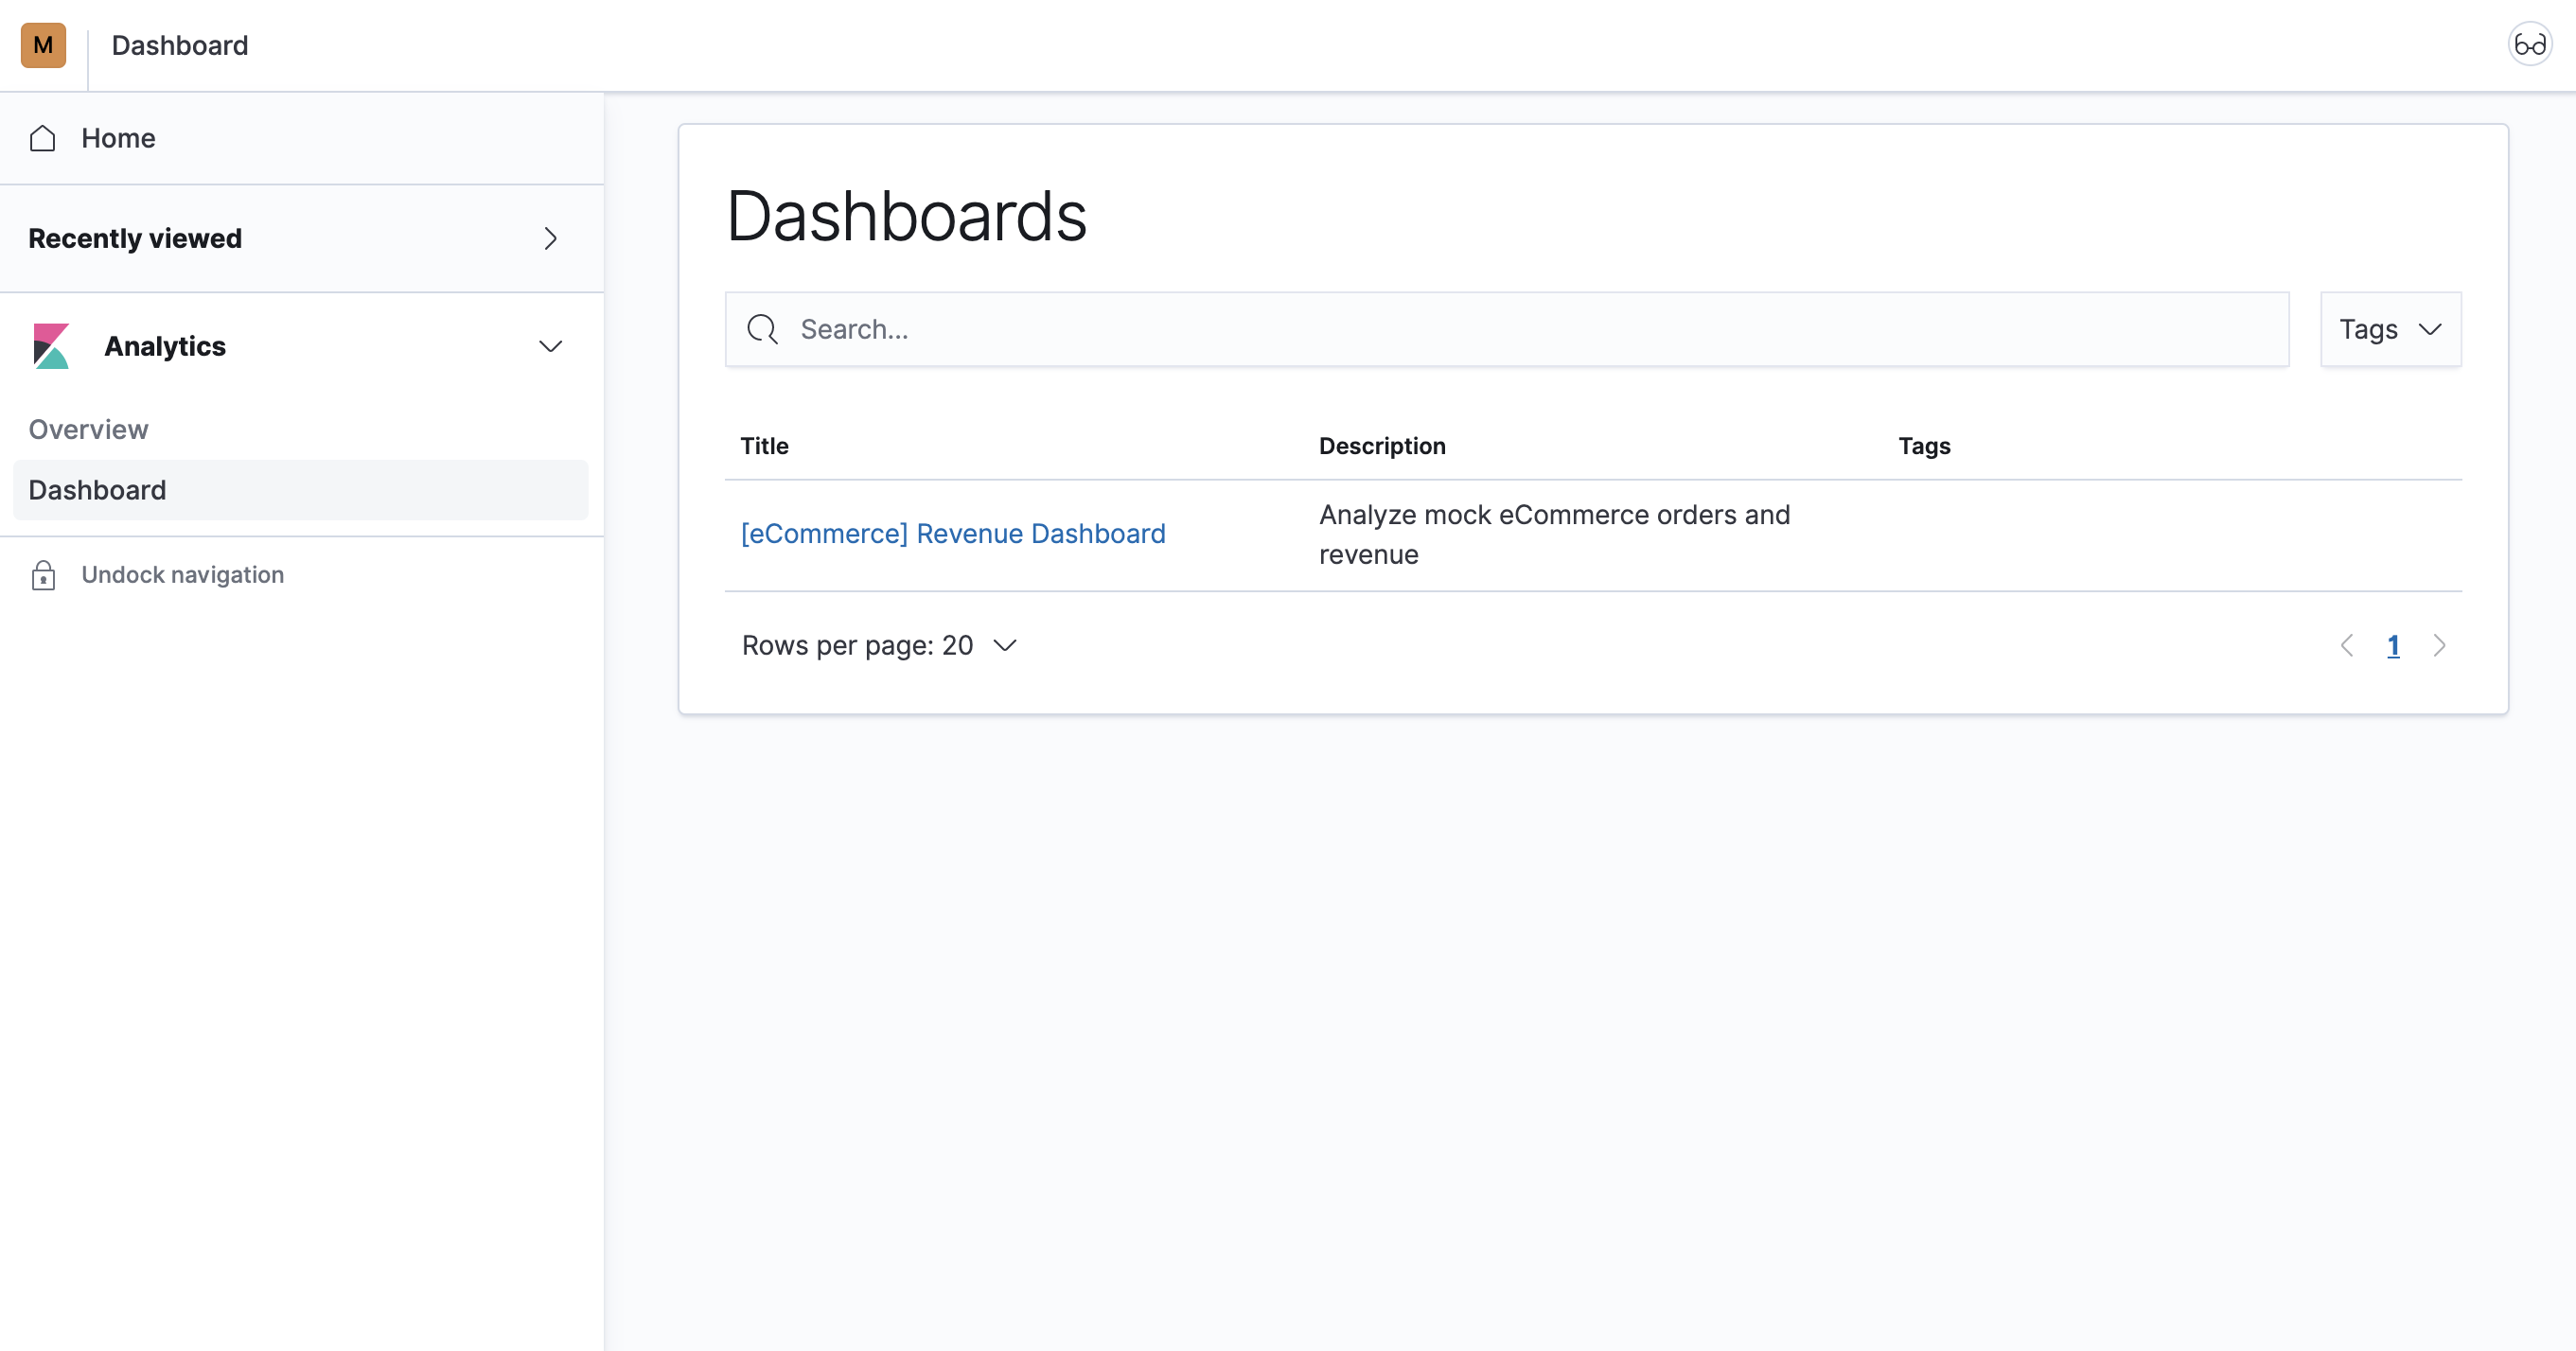 Verifying access to dashboards